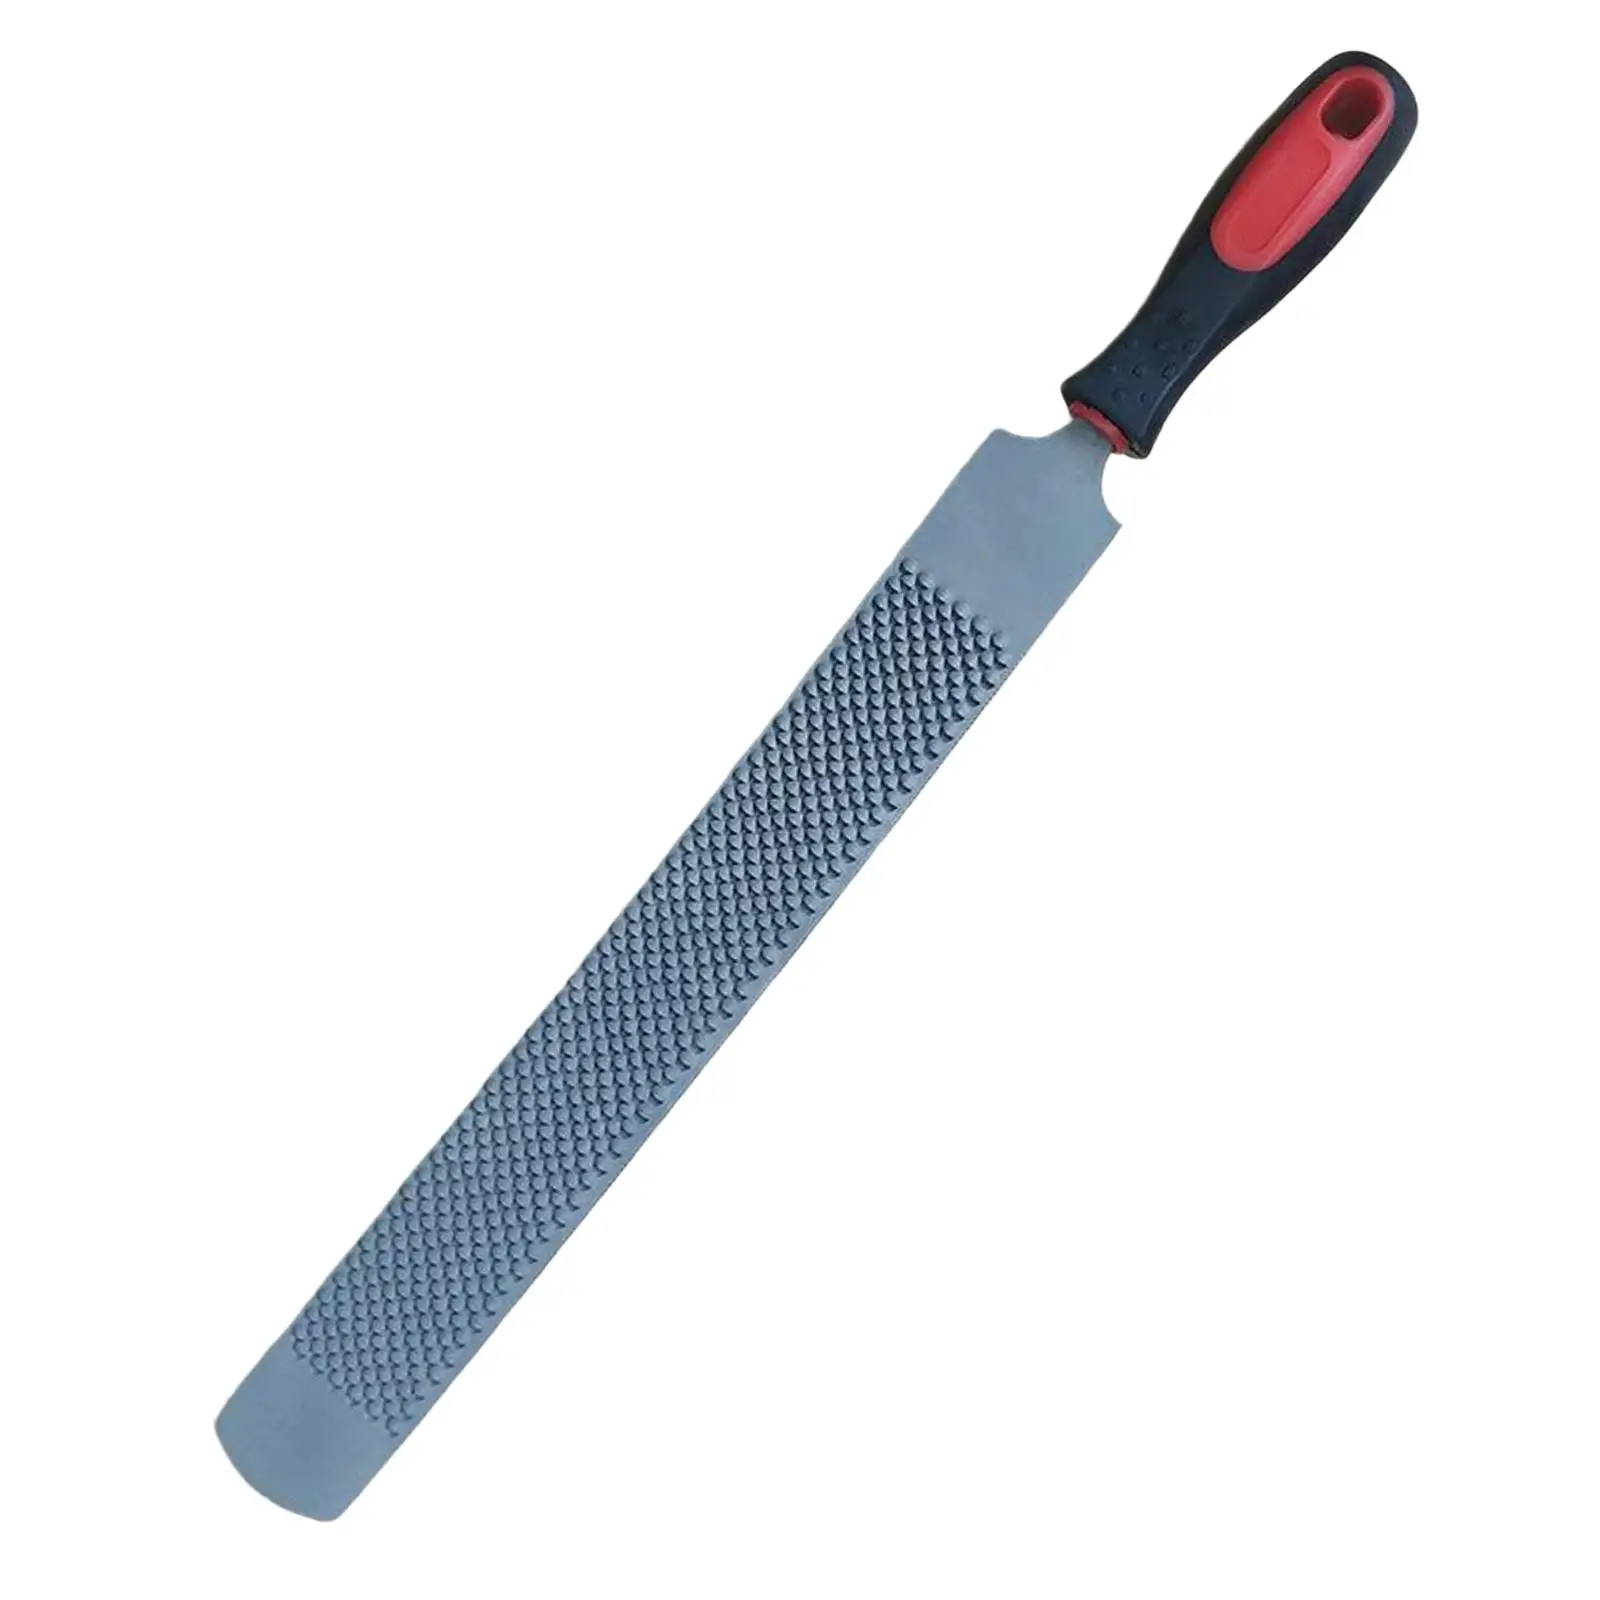 Horse Hoof Rasp Trimming File Knife Double Sided Farrier Tool with Handle for Hoof and Shoe Trimming